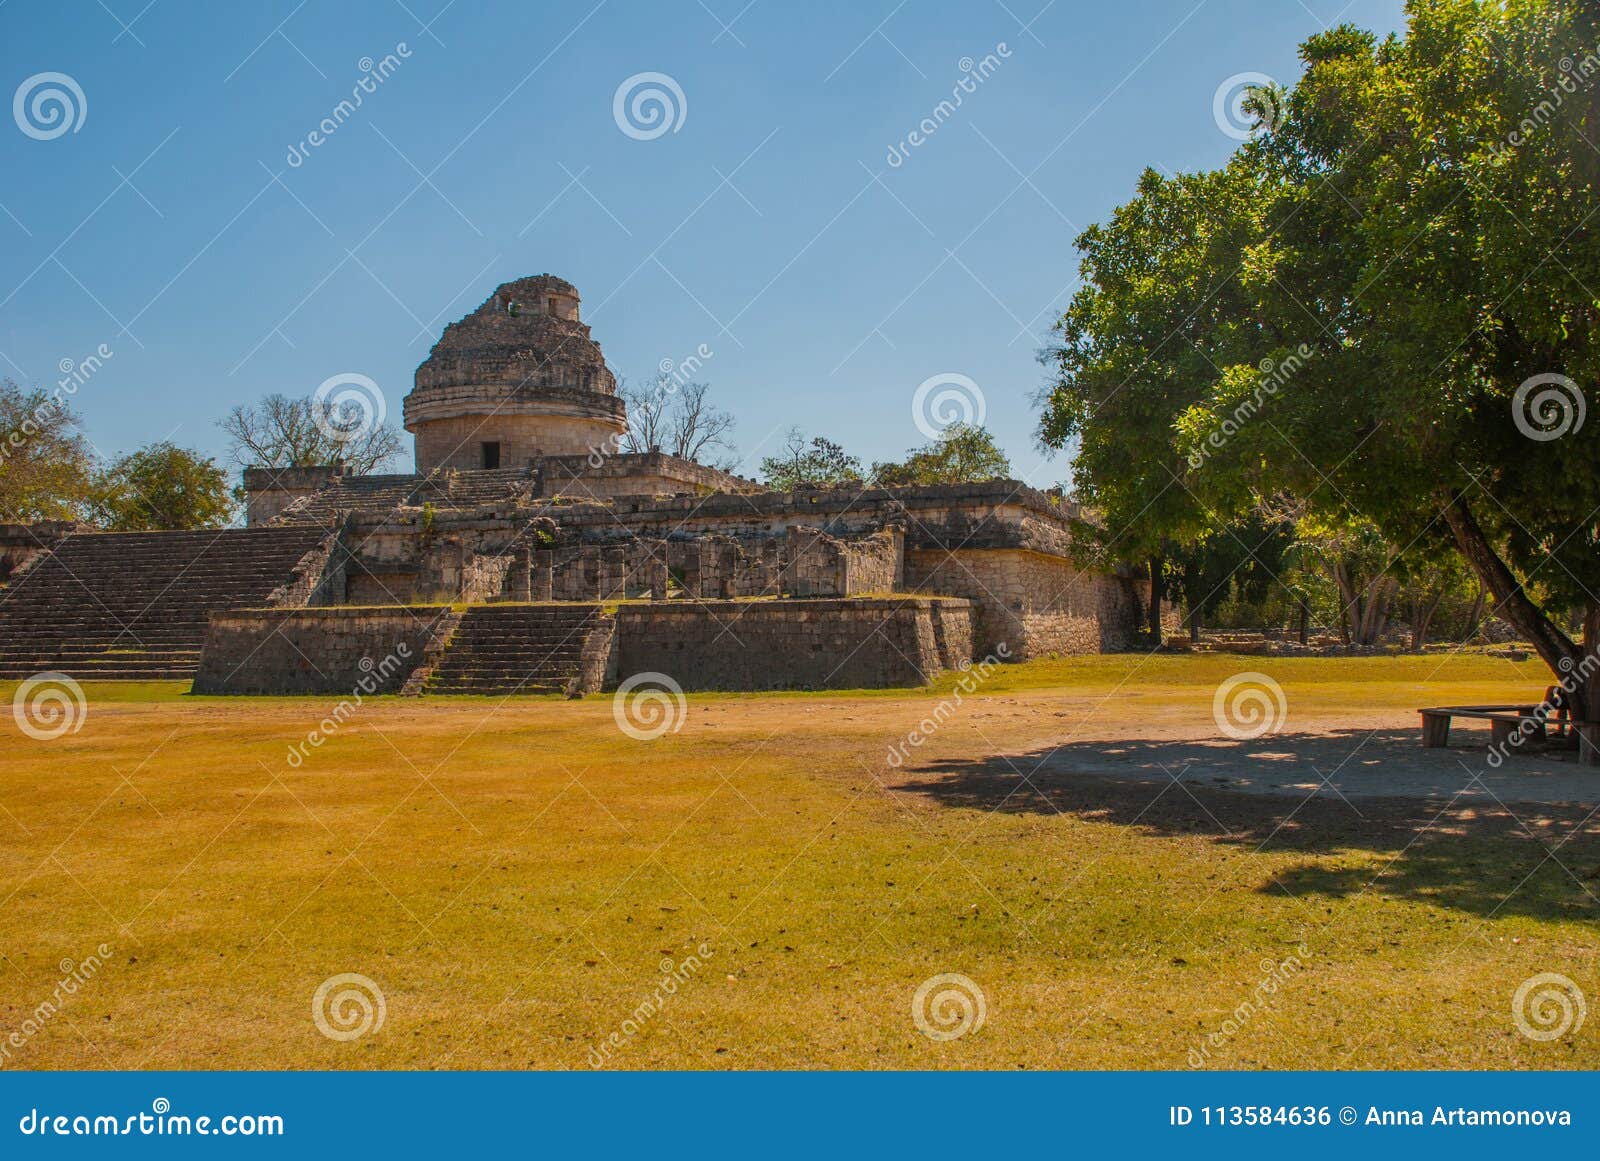 the observatory at chichen itza. mexico